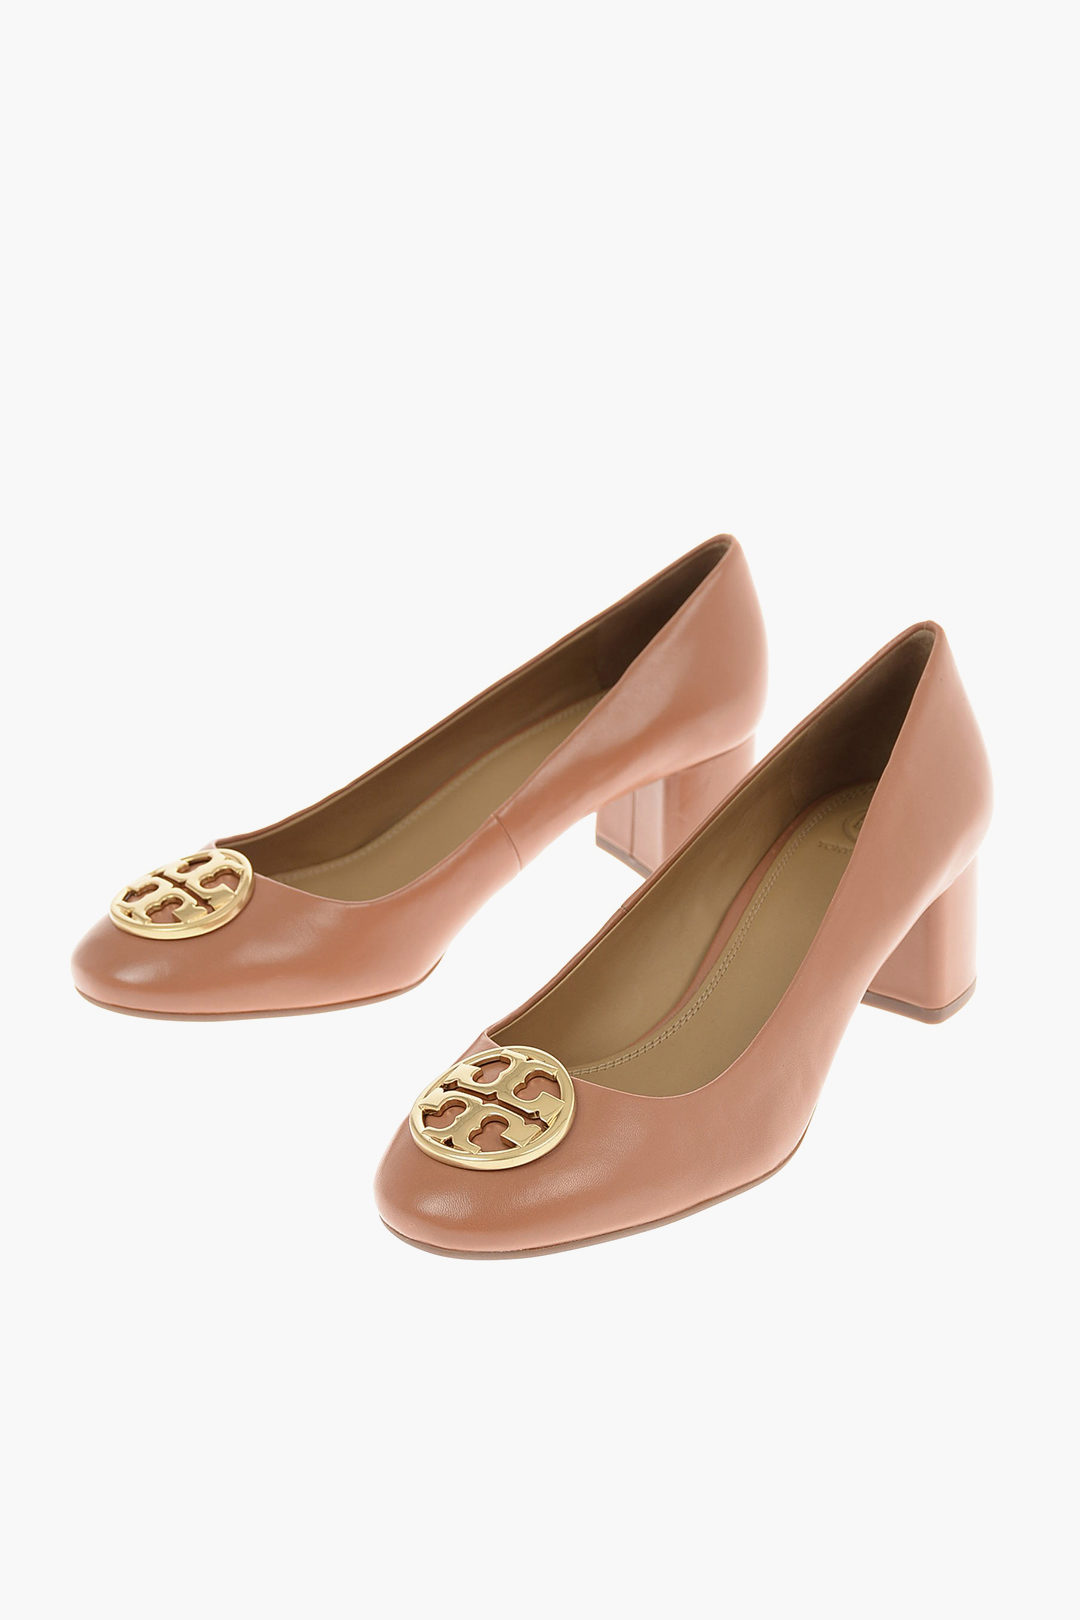 Tory Burch 5cm leather CHELSEA Chunky Heel Pumps women - Glamood Outlet